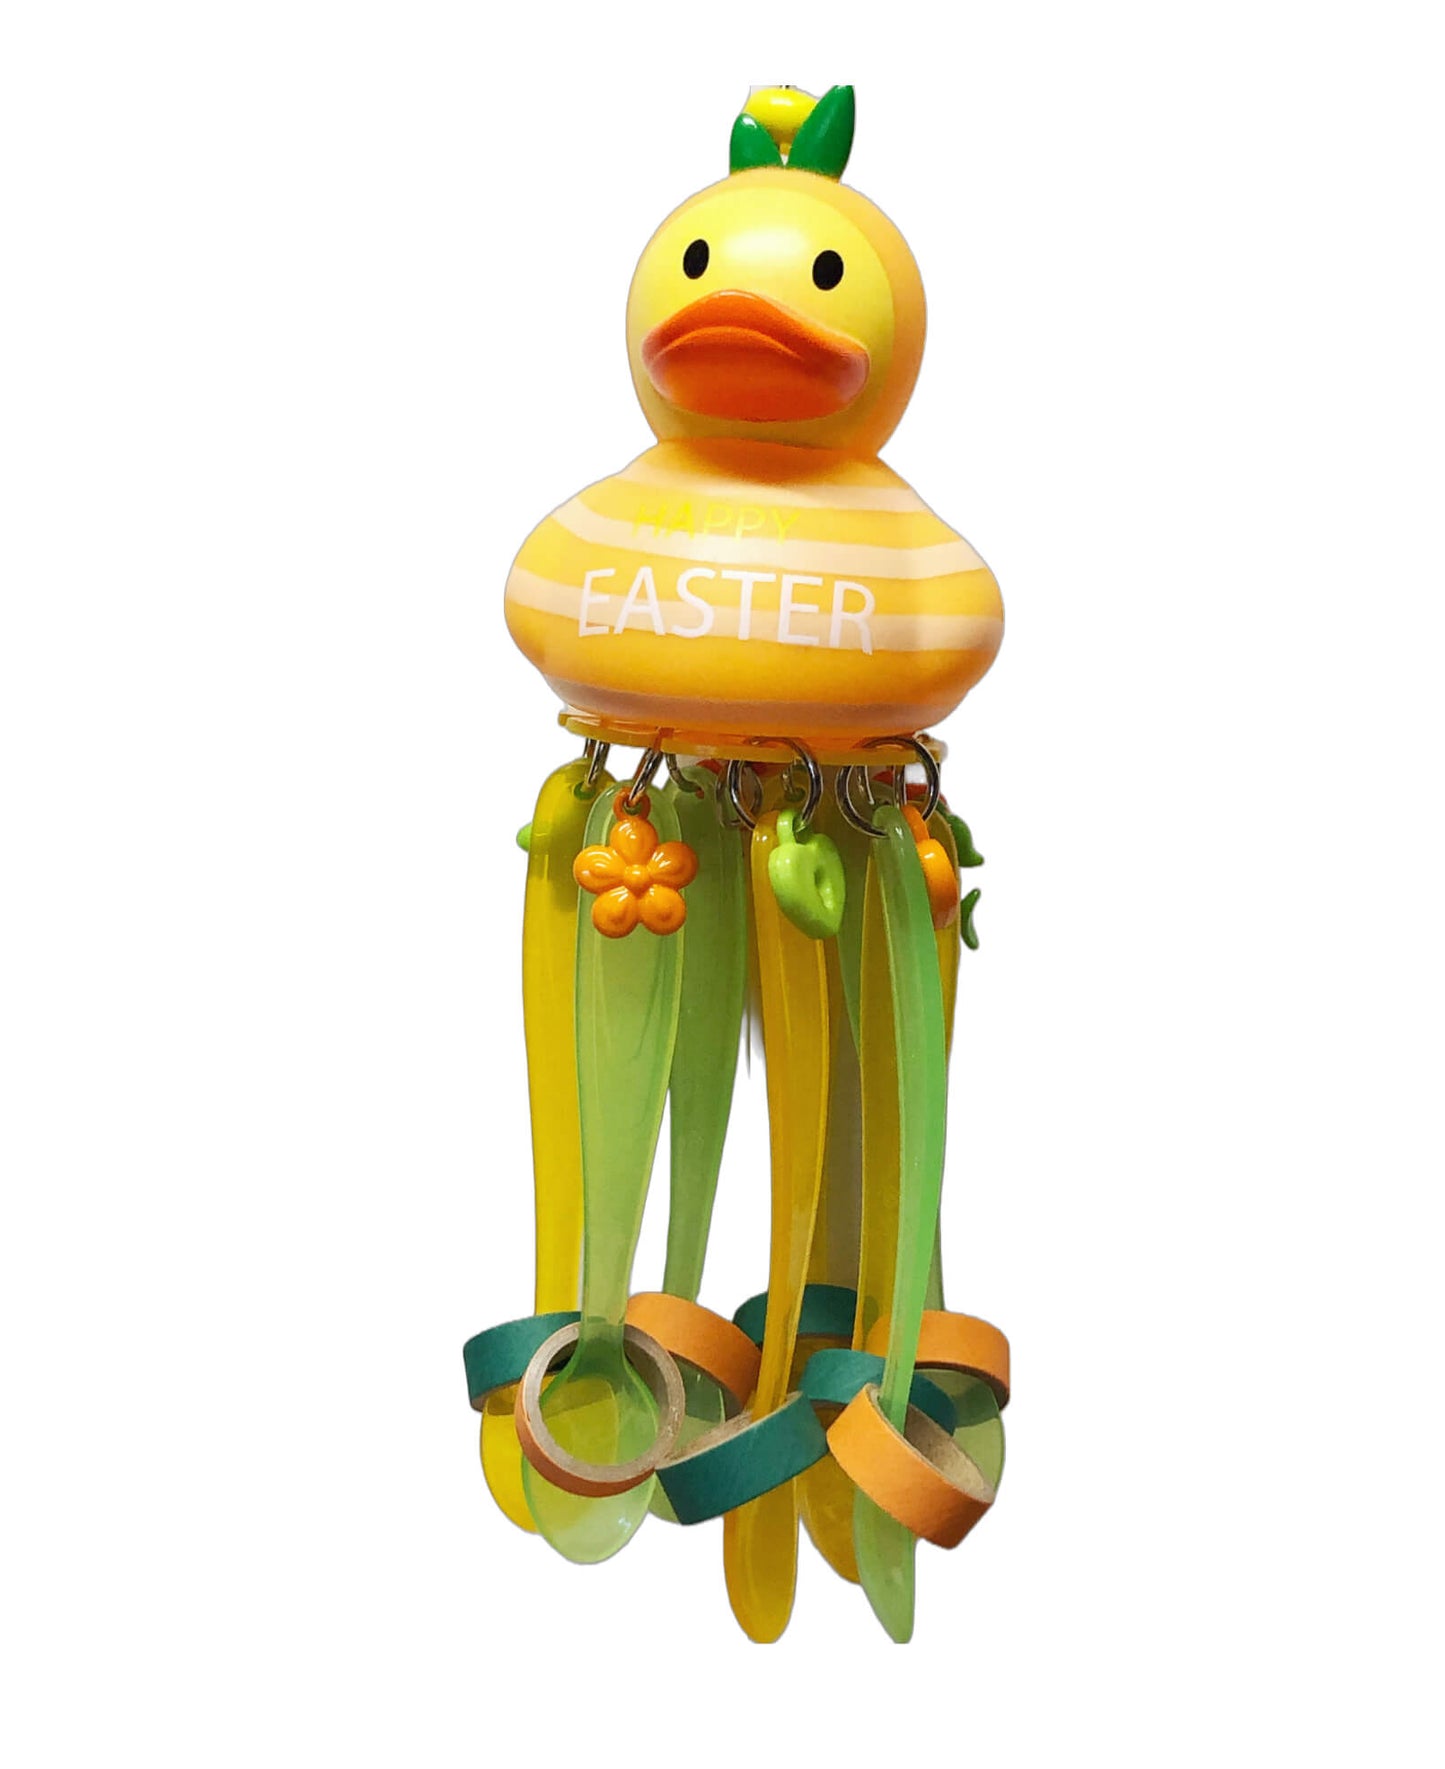 Easter duck with spoons and charms